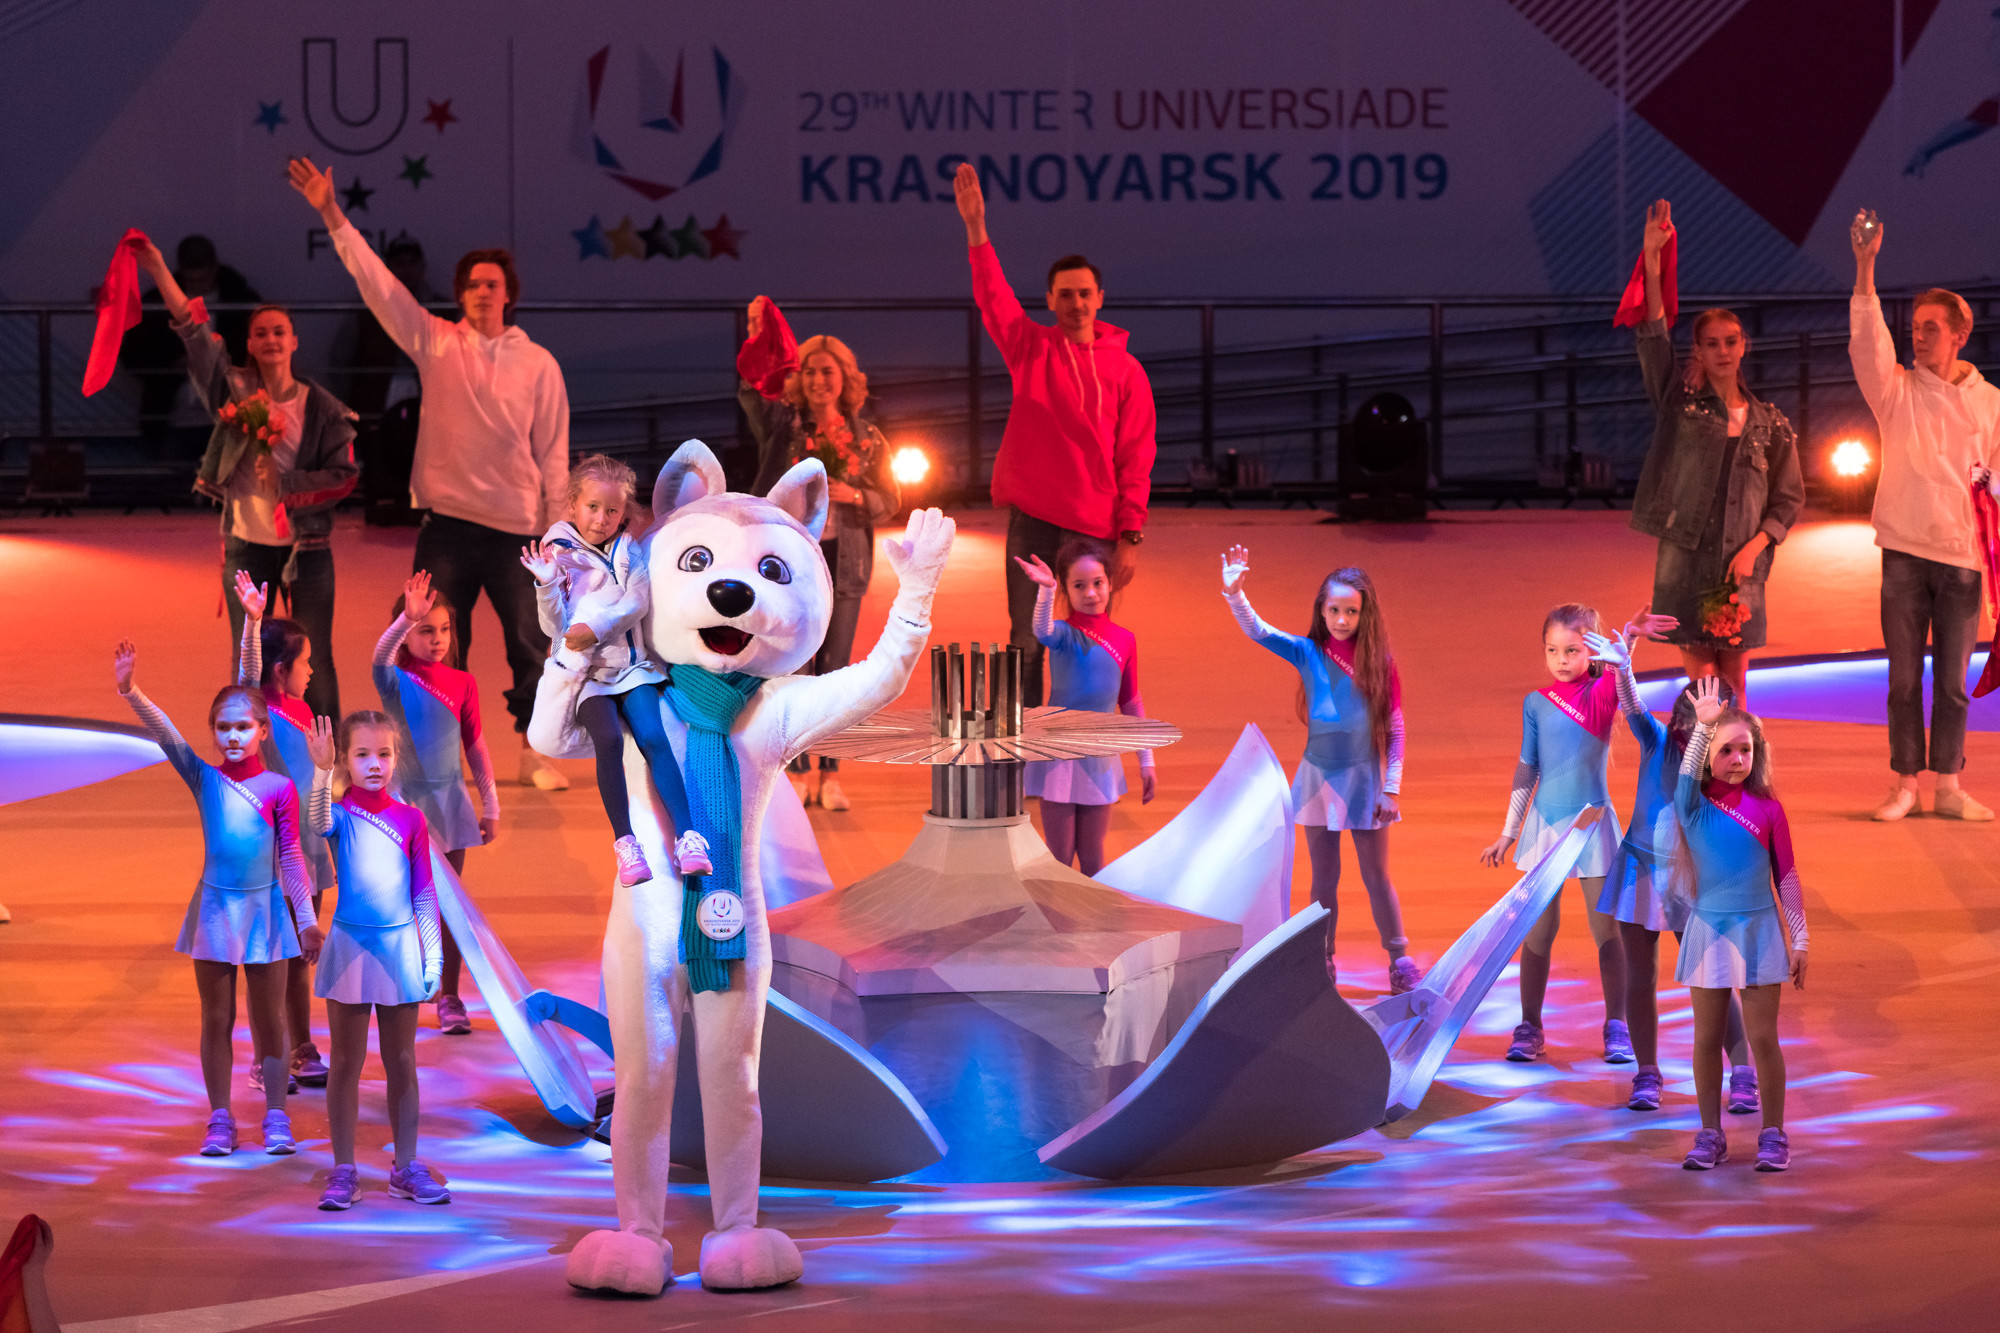 The next Winter Universiade will take place in the Swiss city of Lucerne in 2021 ©Krasnoyarsk 2019